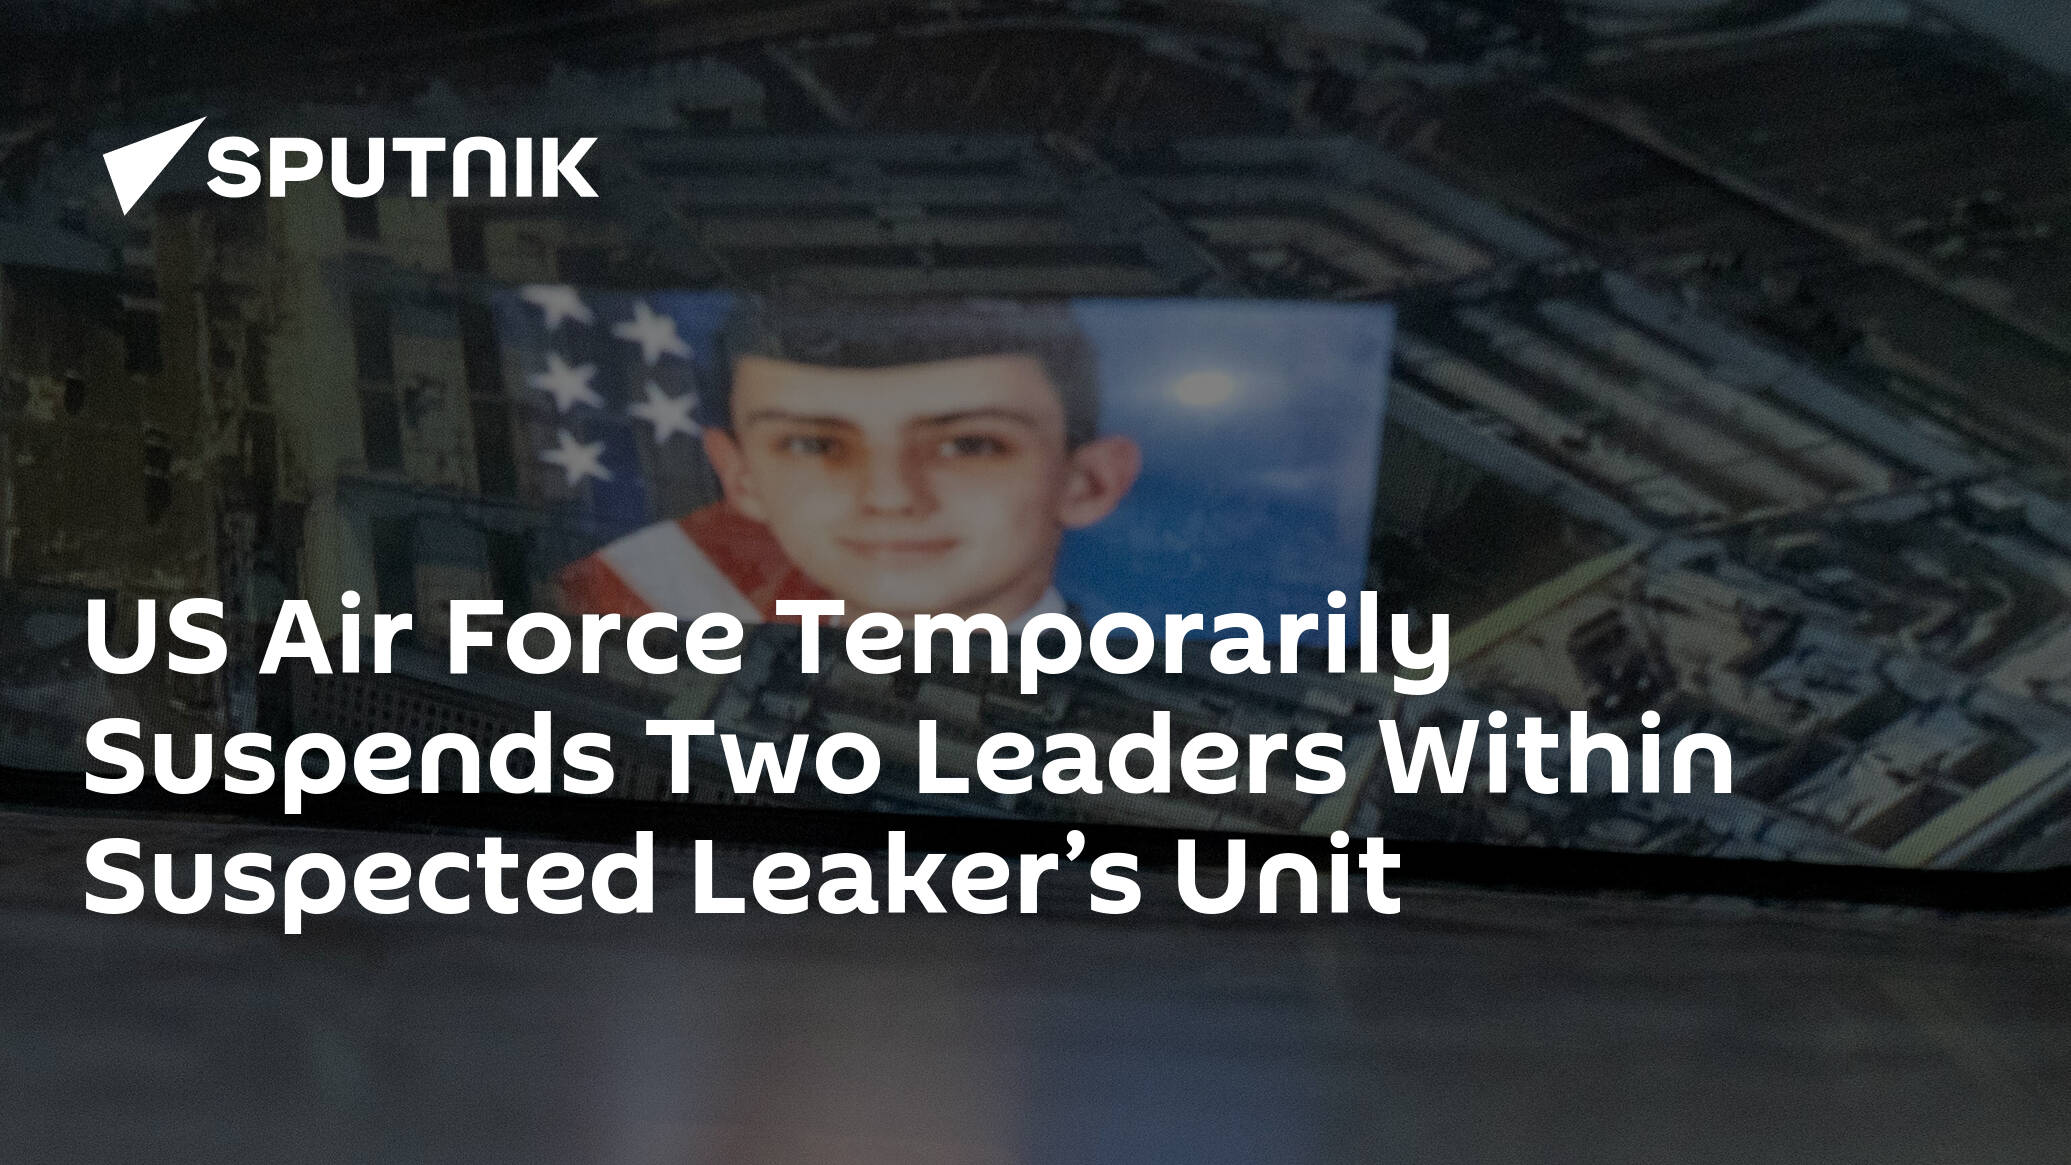 US Air Force Temporarily Suspends Two Leaders Within Suspected Leaker’s Unit